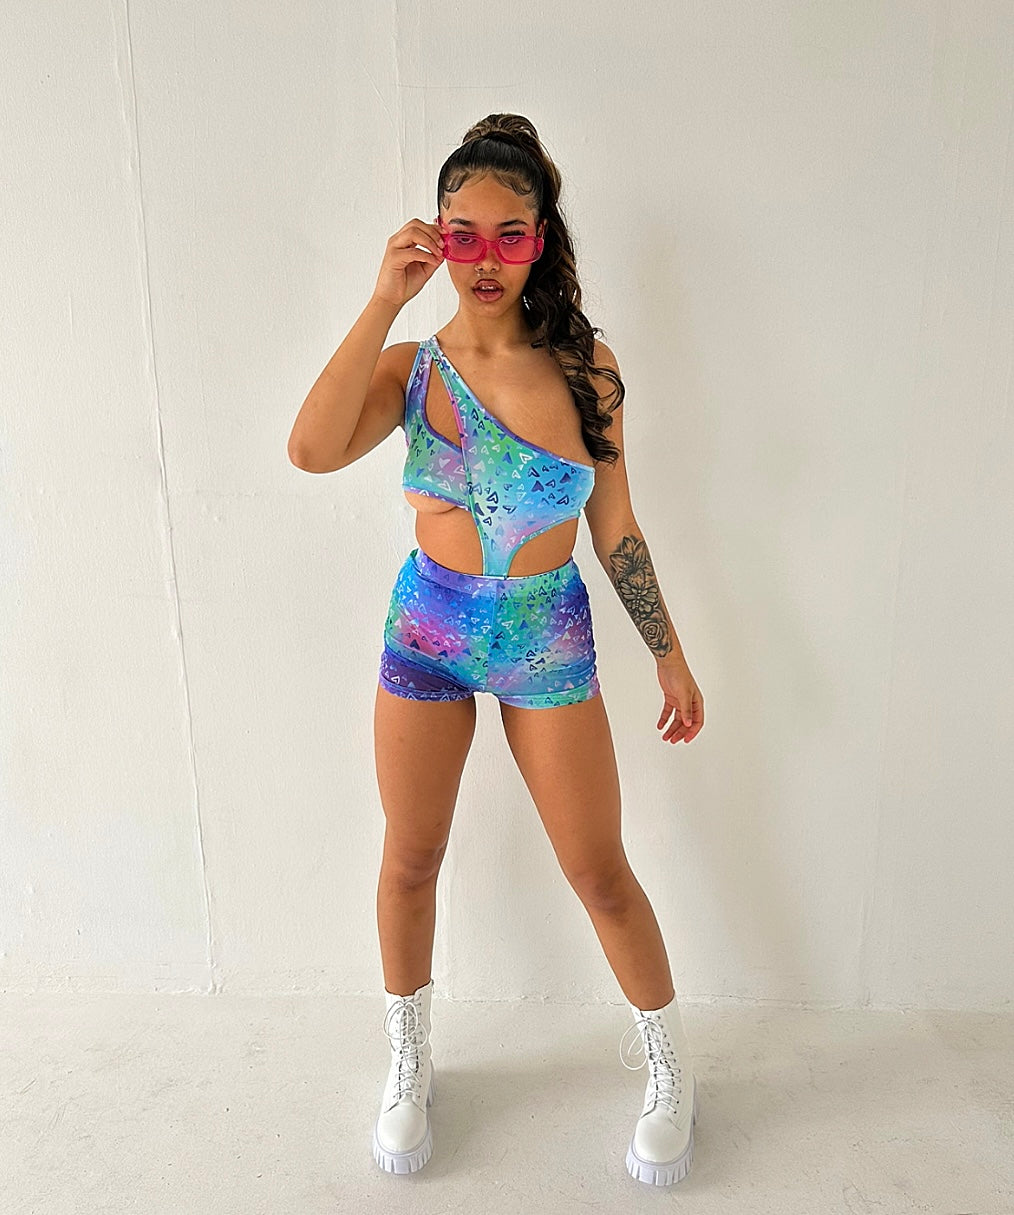 LOVE HEART TWO PIECE, FESTIVAL TWO PIECE, RAVE OUTFIT